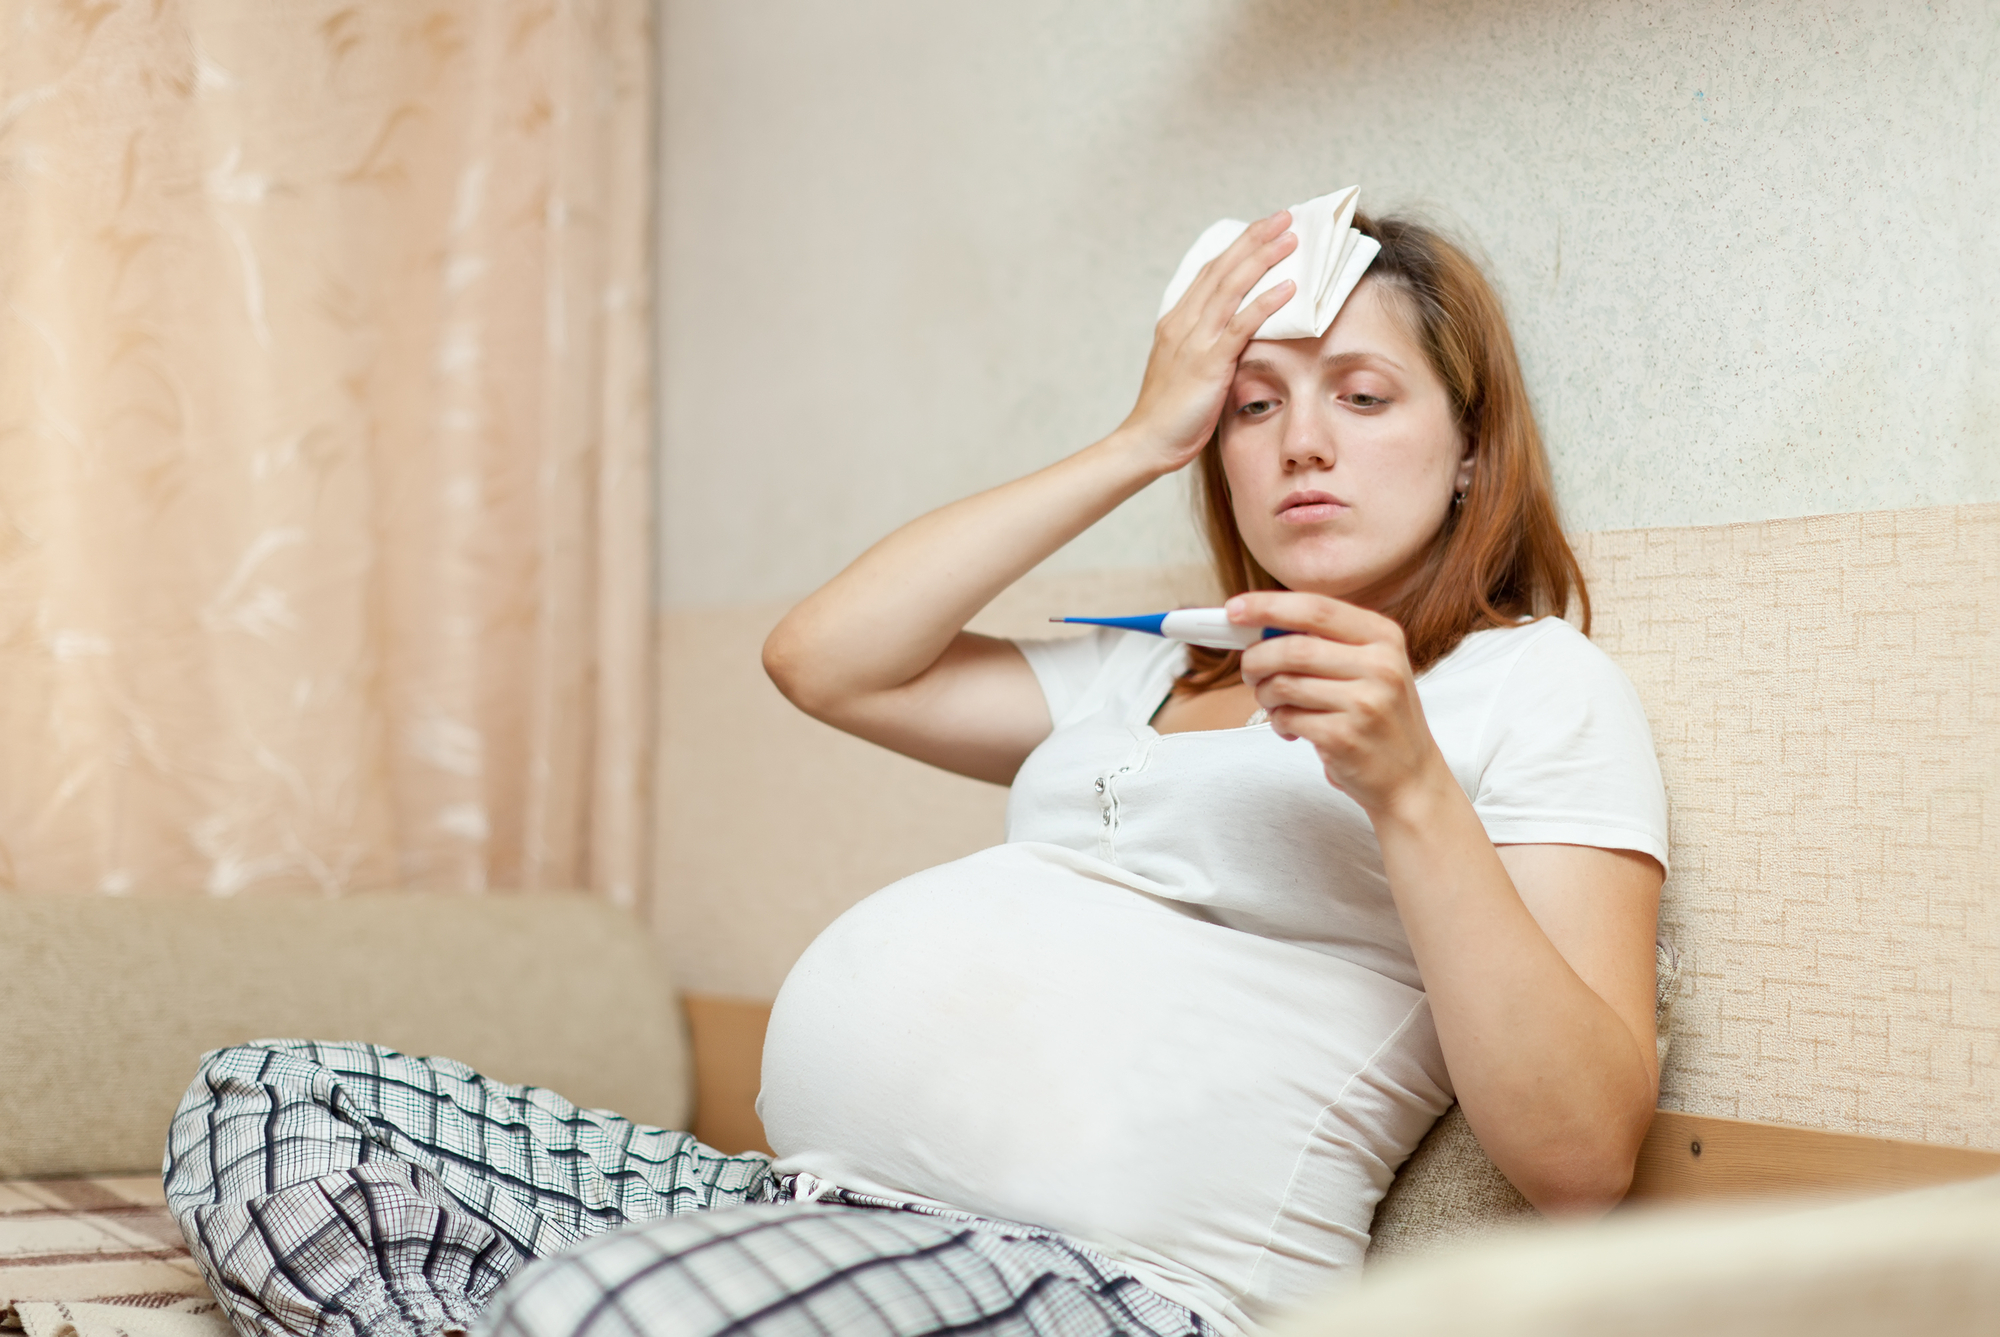 You are currently viewing Home Remedies for Colds During Pregnancy: Self-Care Tips & Foods You Can Eat to Help You Feel Better Fast!